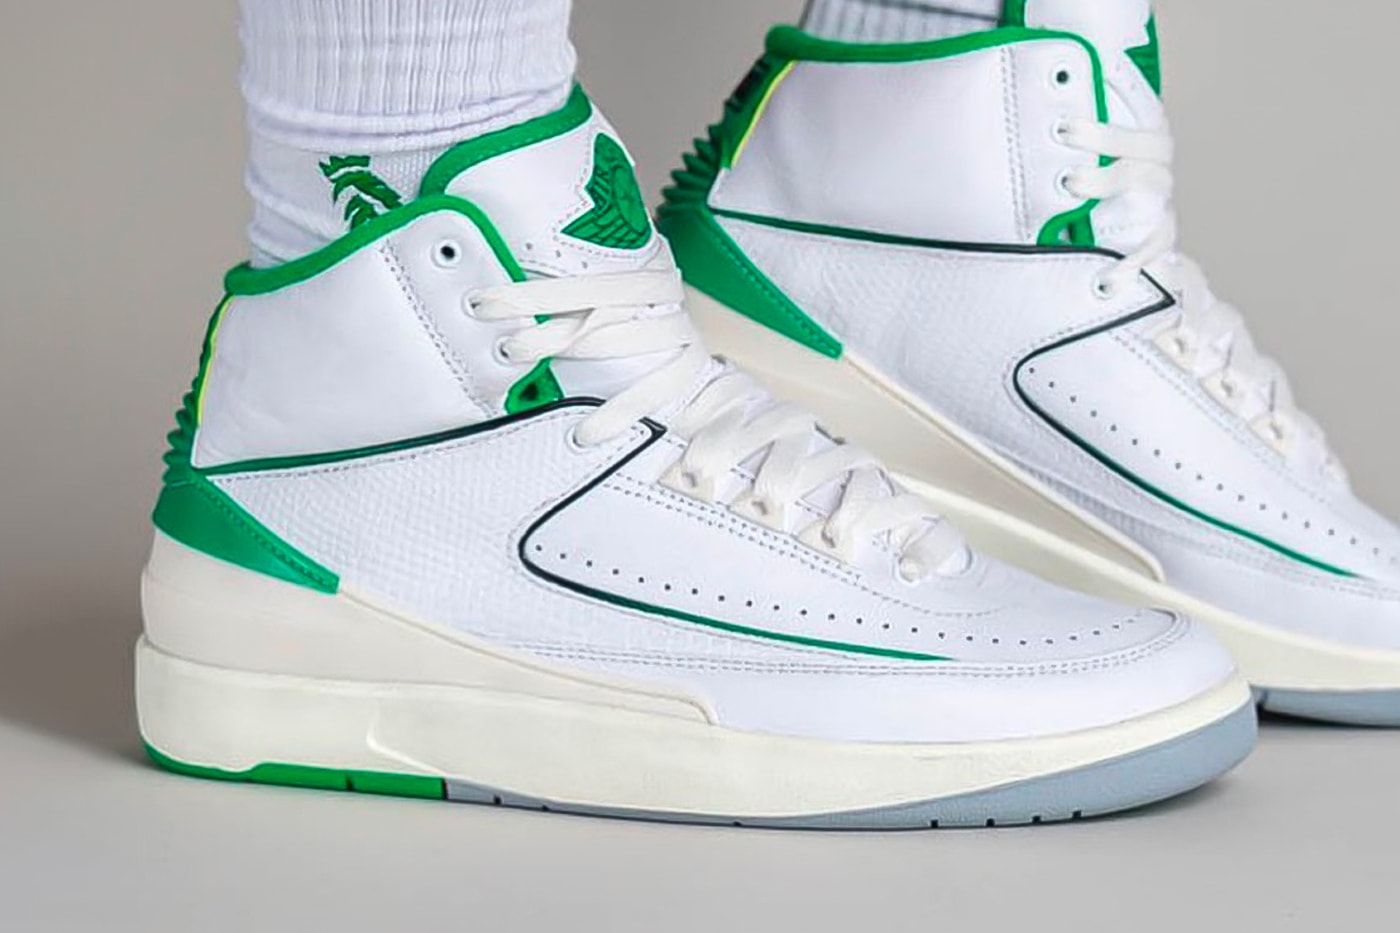 air michael jordan brand 2 lucky green white celtics sneakers official release date info photos price store list buying guide on foot